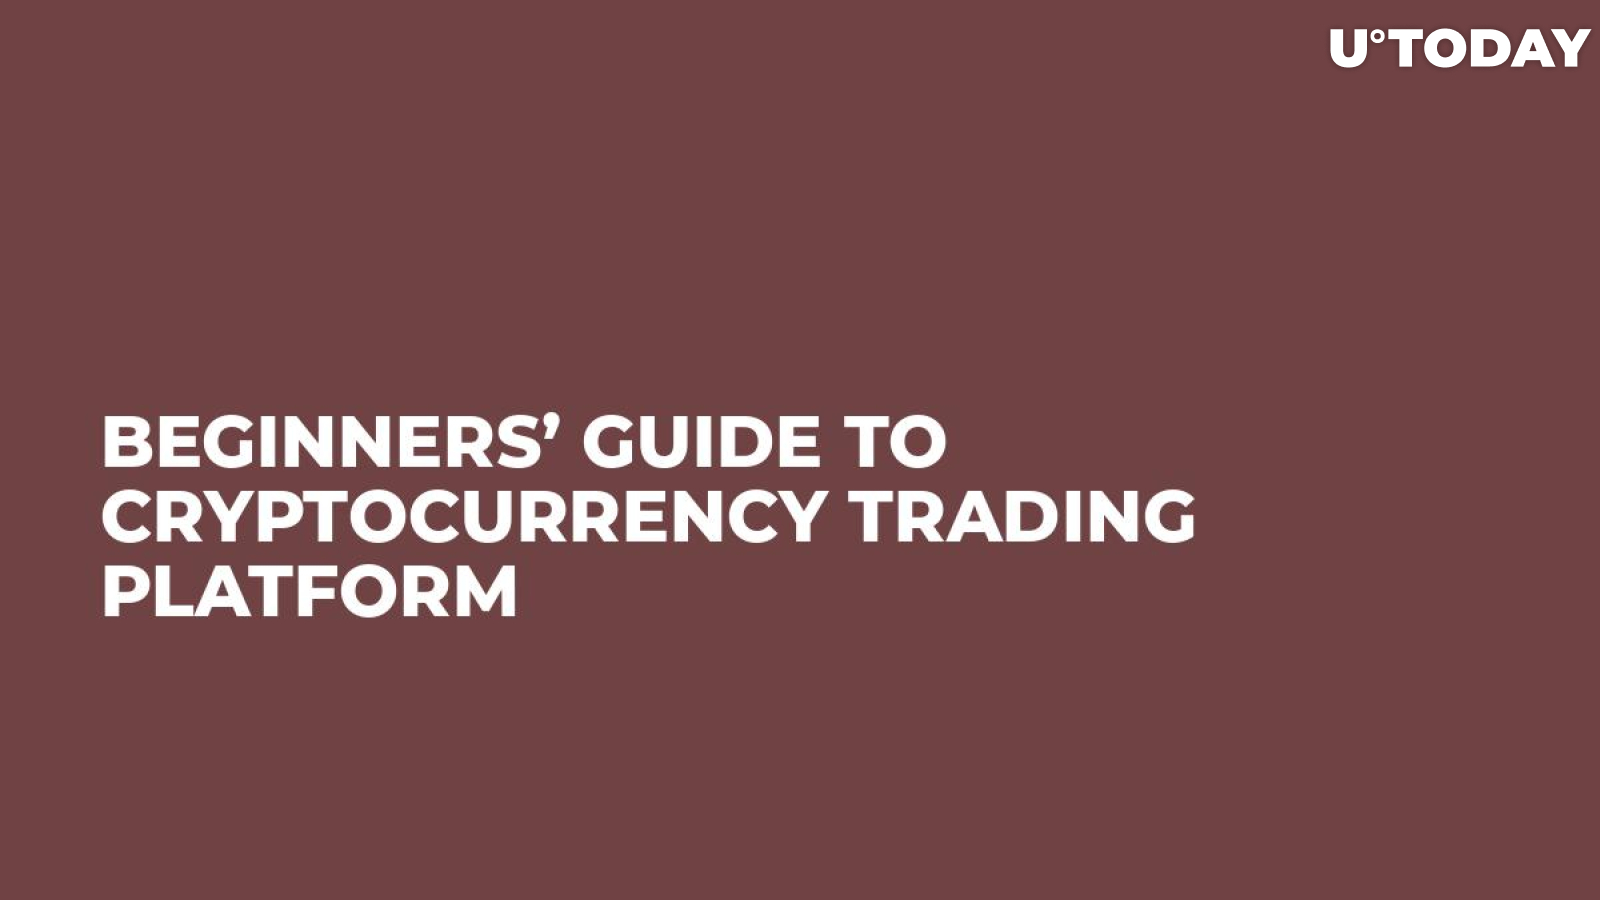 Cryptocurrency trading platform for beginners bitcoin stock reddit